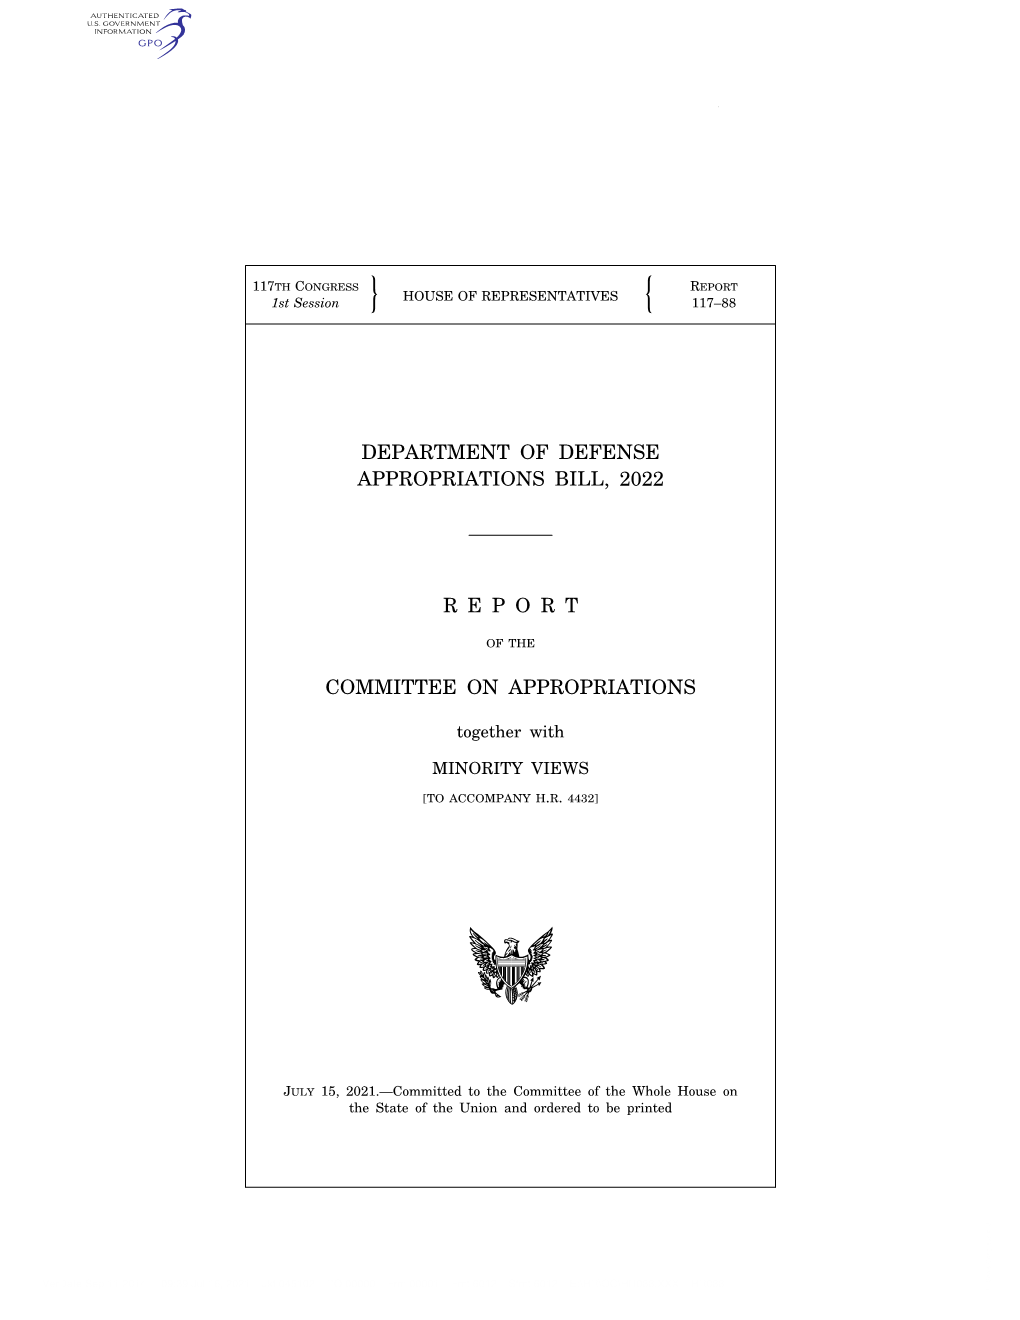 Department of Defense Appropriations Bill, 2022